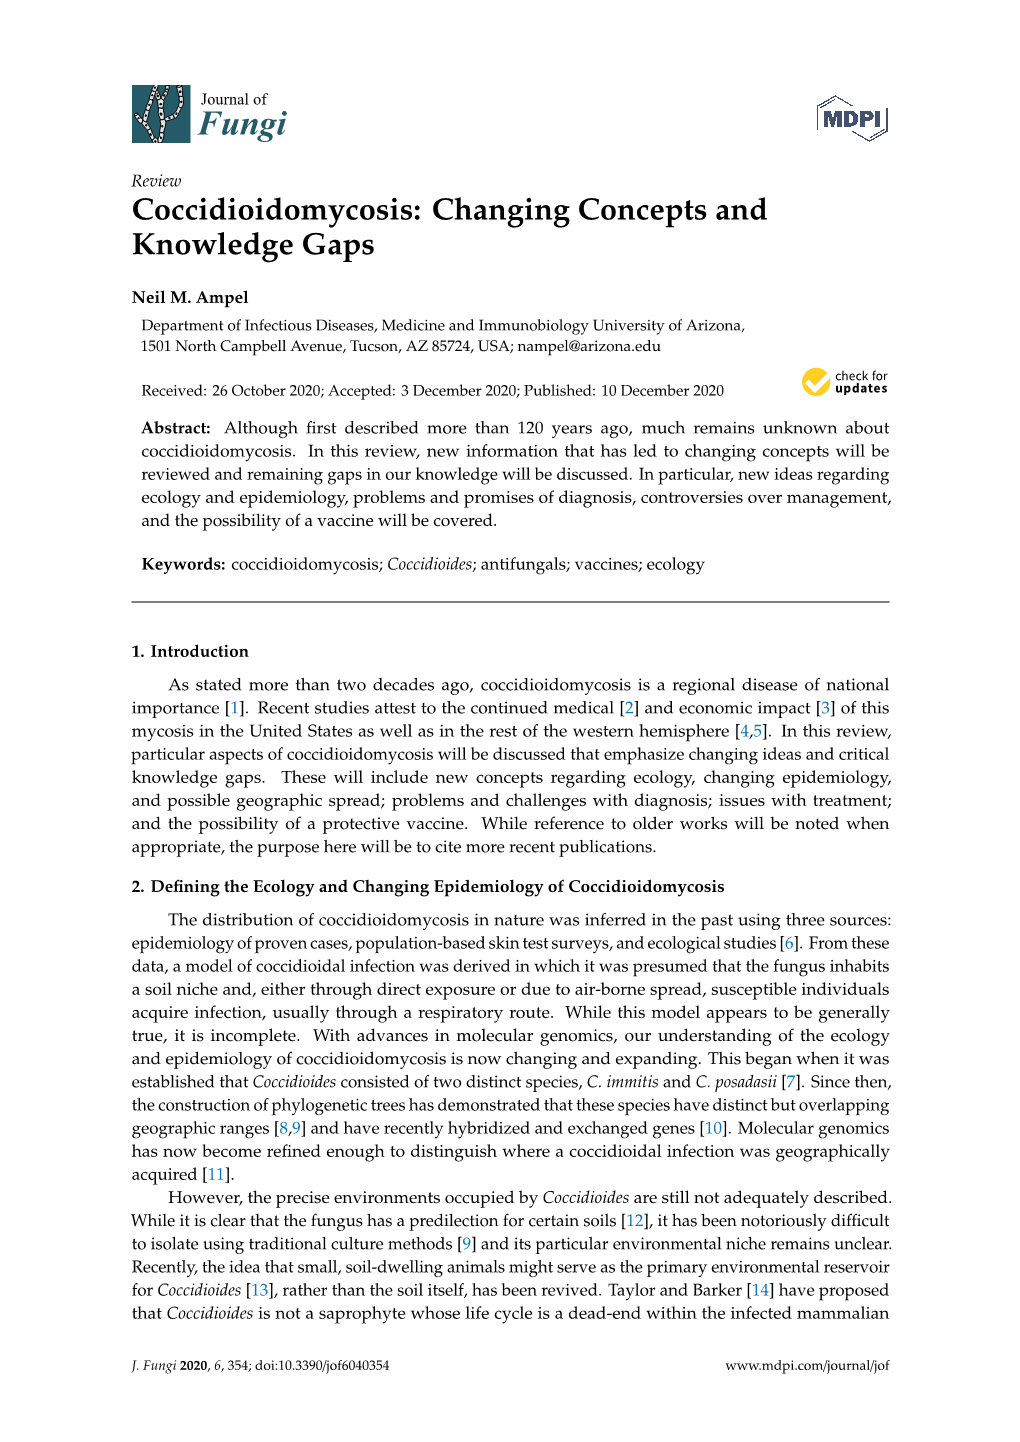 Coccidioidomycosis: Changing Concepts and Knowledge Gaps